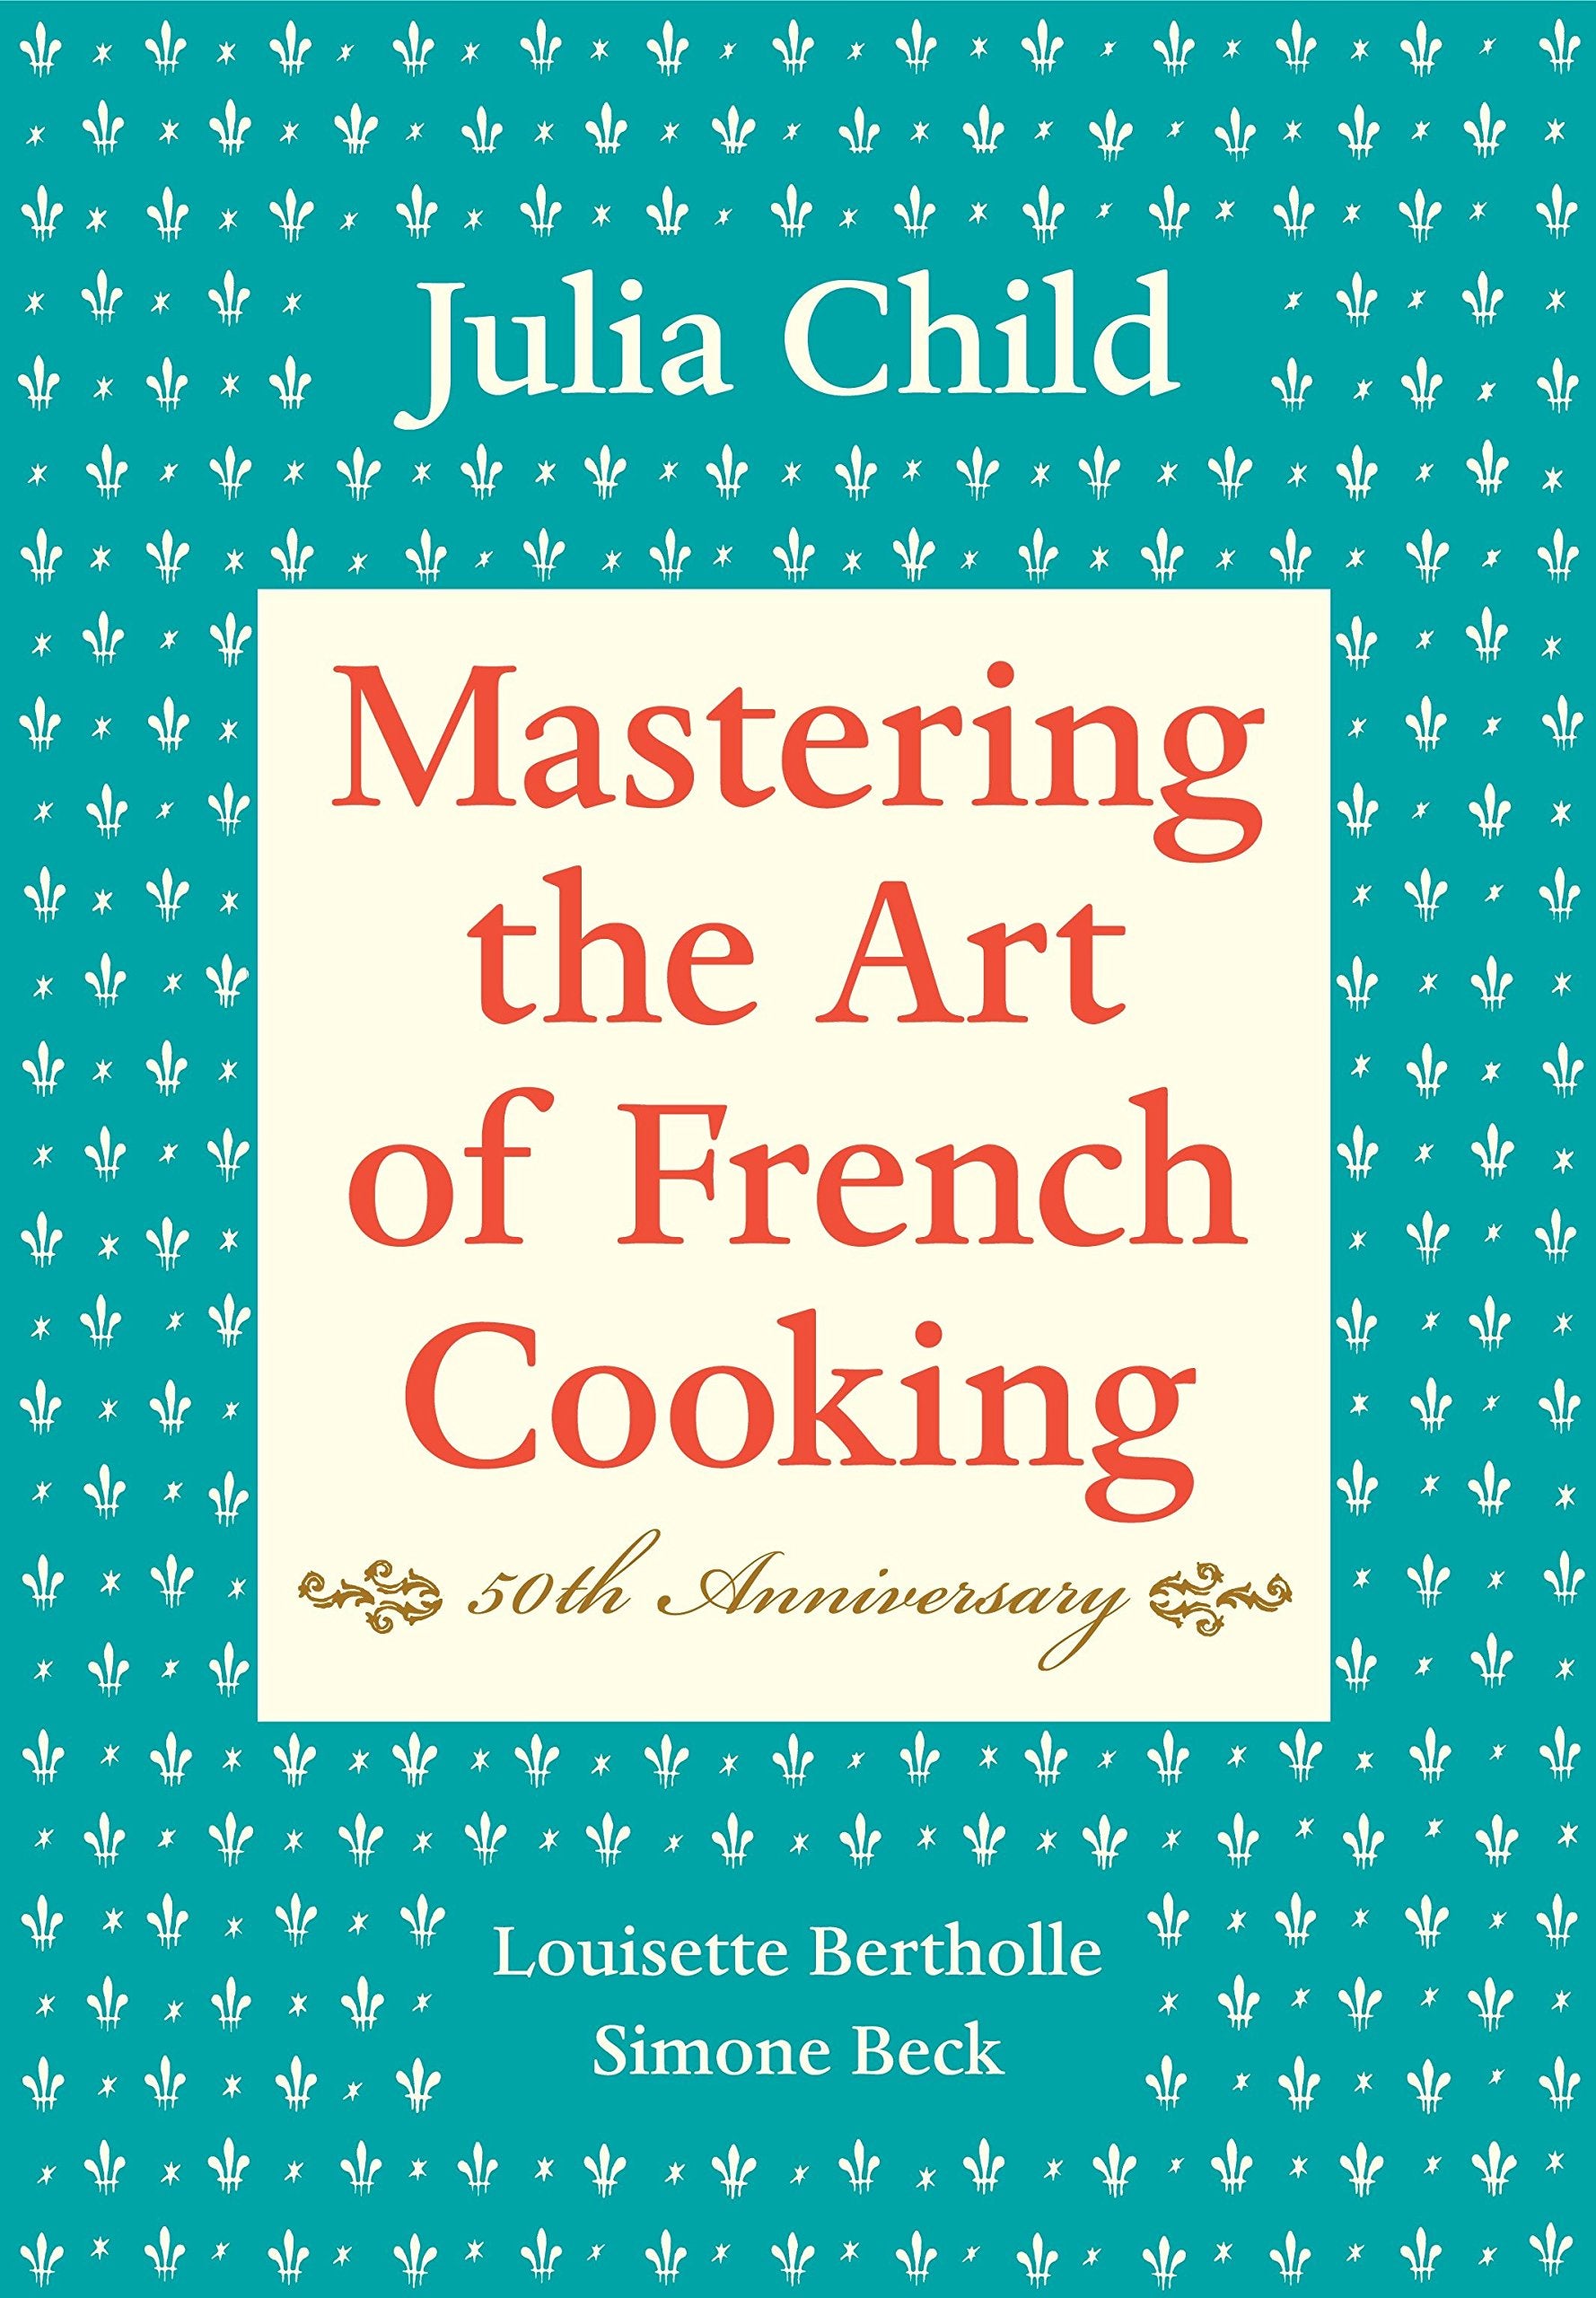 Mastering the Art of French Cooking, Vol. 1 (Julia Child, Louisette Bertholle, Simone Beck)